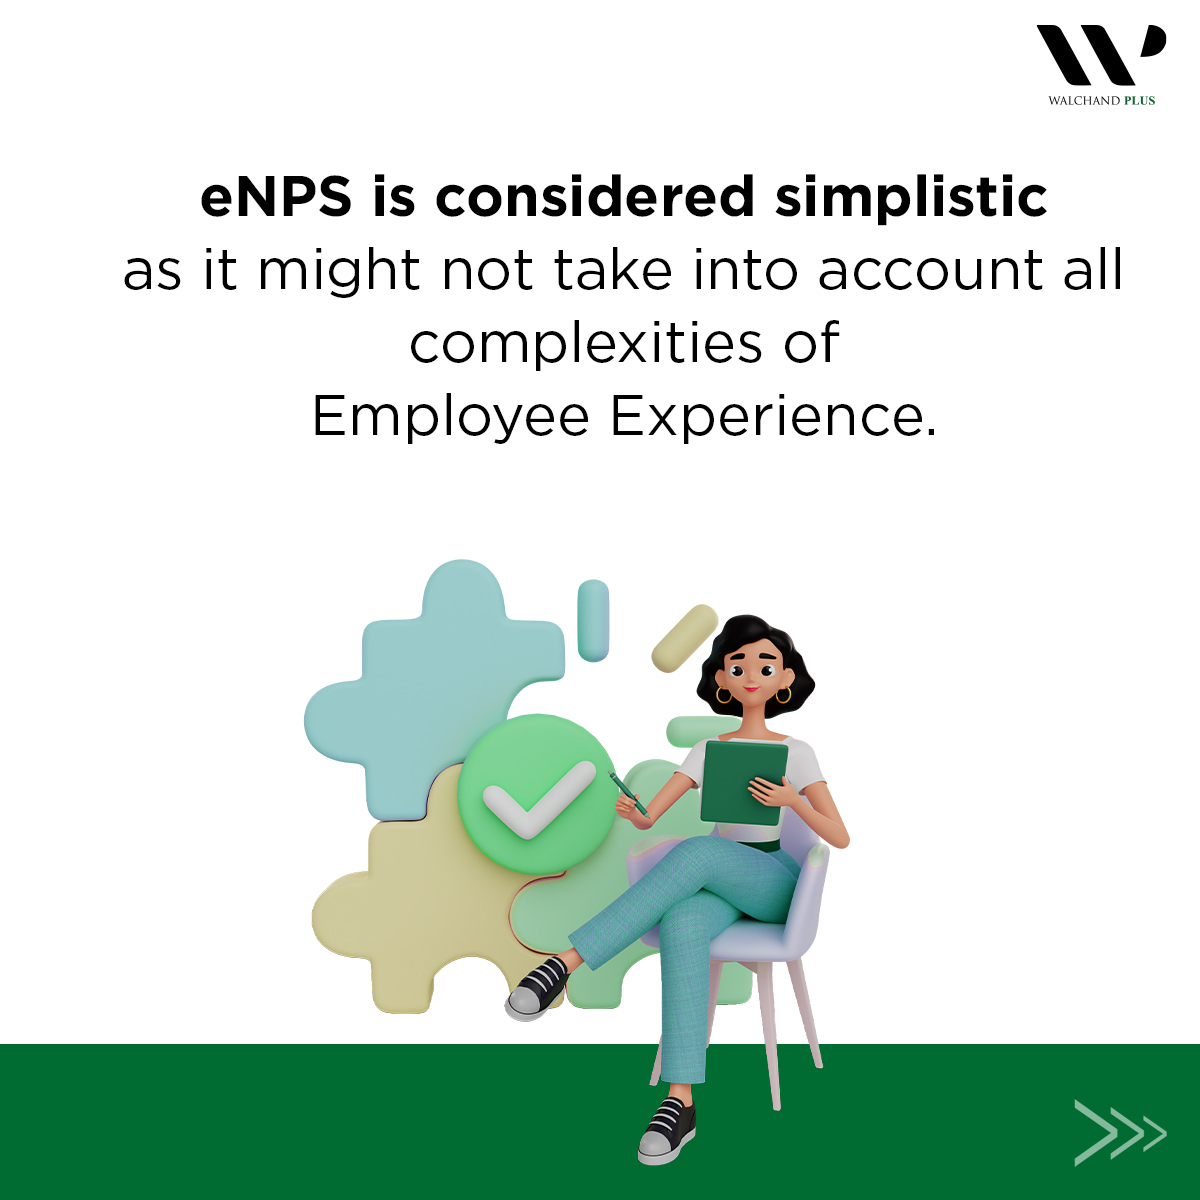 Originating as a customer loyalty metric, eNPS has been adapted to measure employee loyalty.

Visit our website to understand the true strategic potential of eNPS and other crucial HR metrics: bit.ly/contact_us

#Walchand #WalchandPlus #eNPS #EmployeeLoyalty #HRMetrics